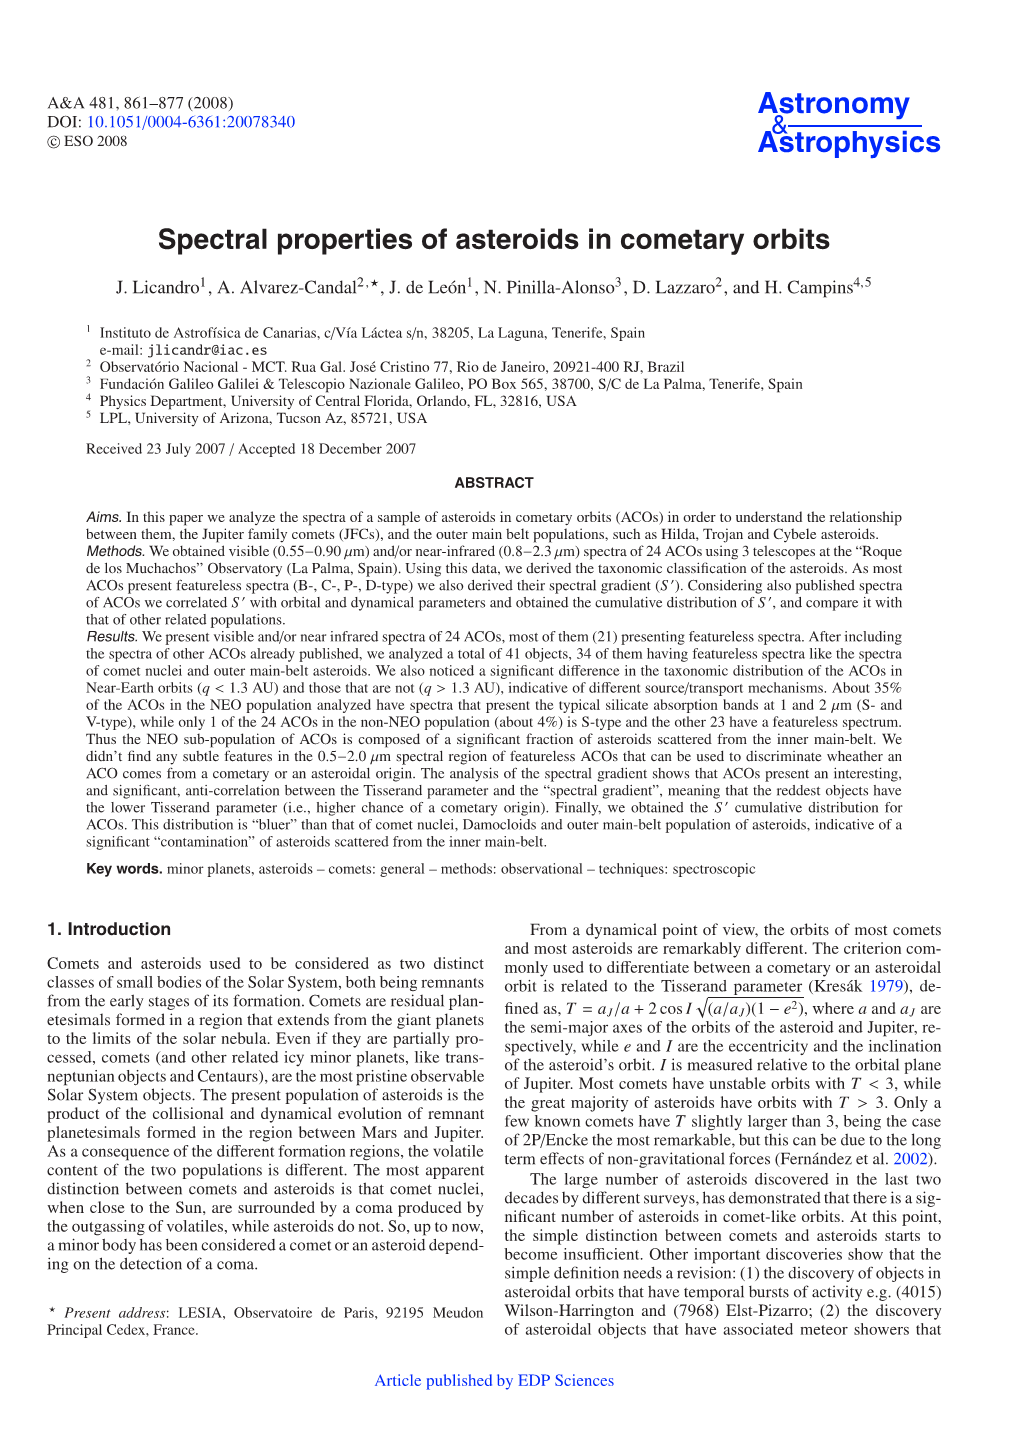 Spectral Properties of Asteroids in Cometary Orbits